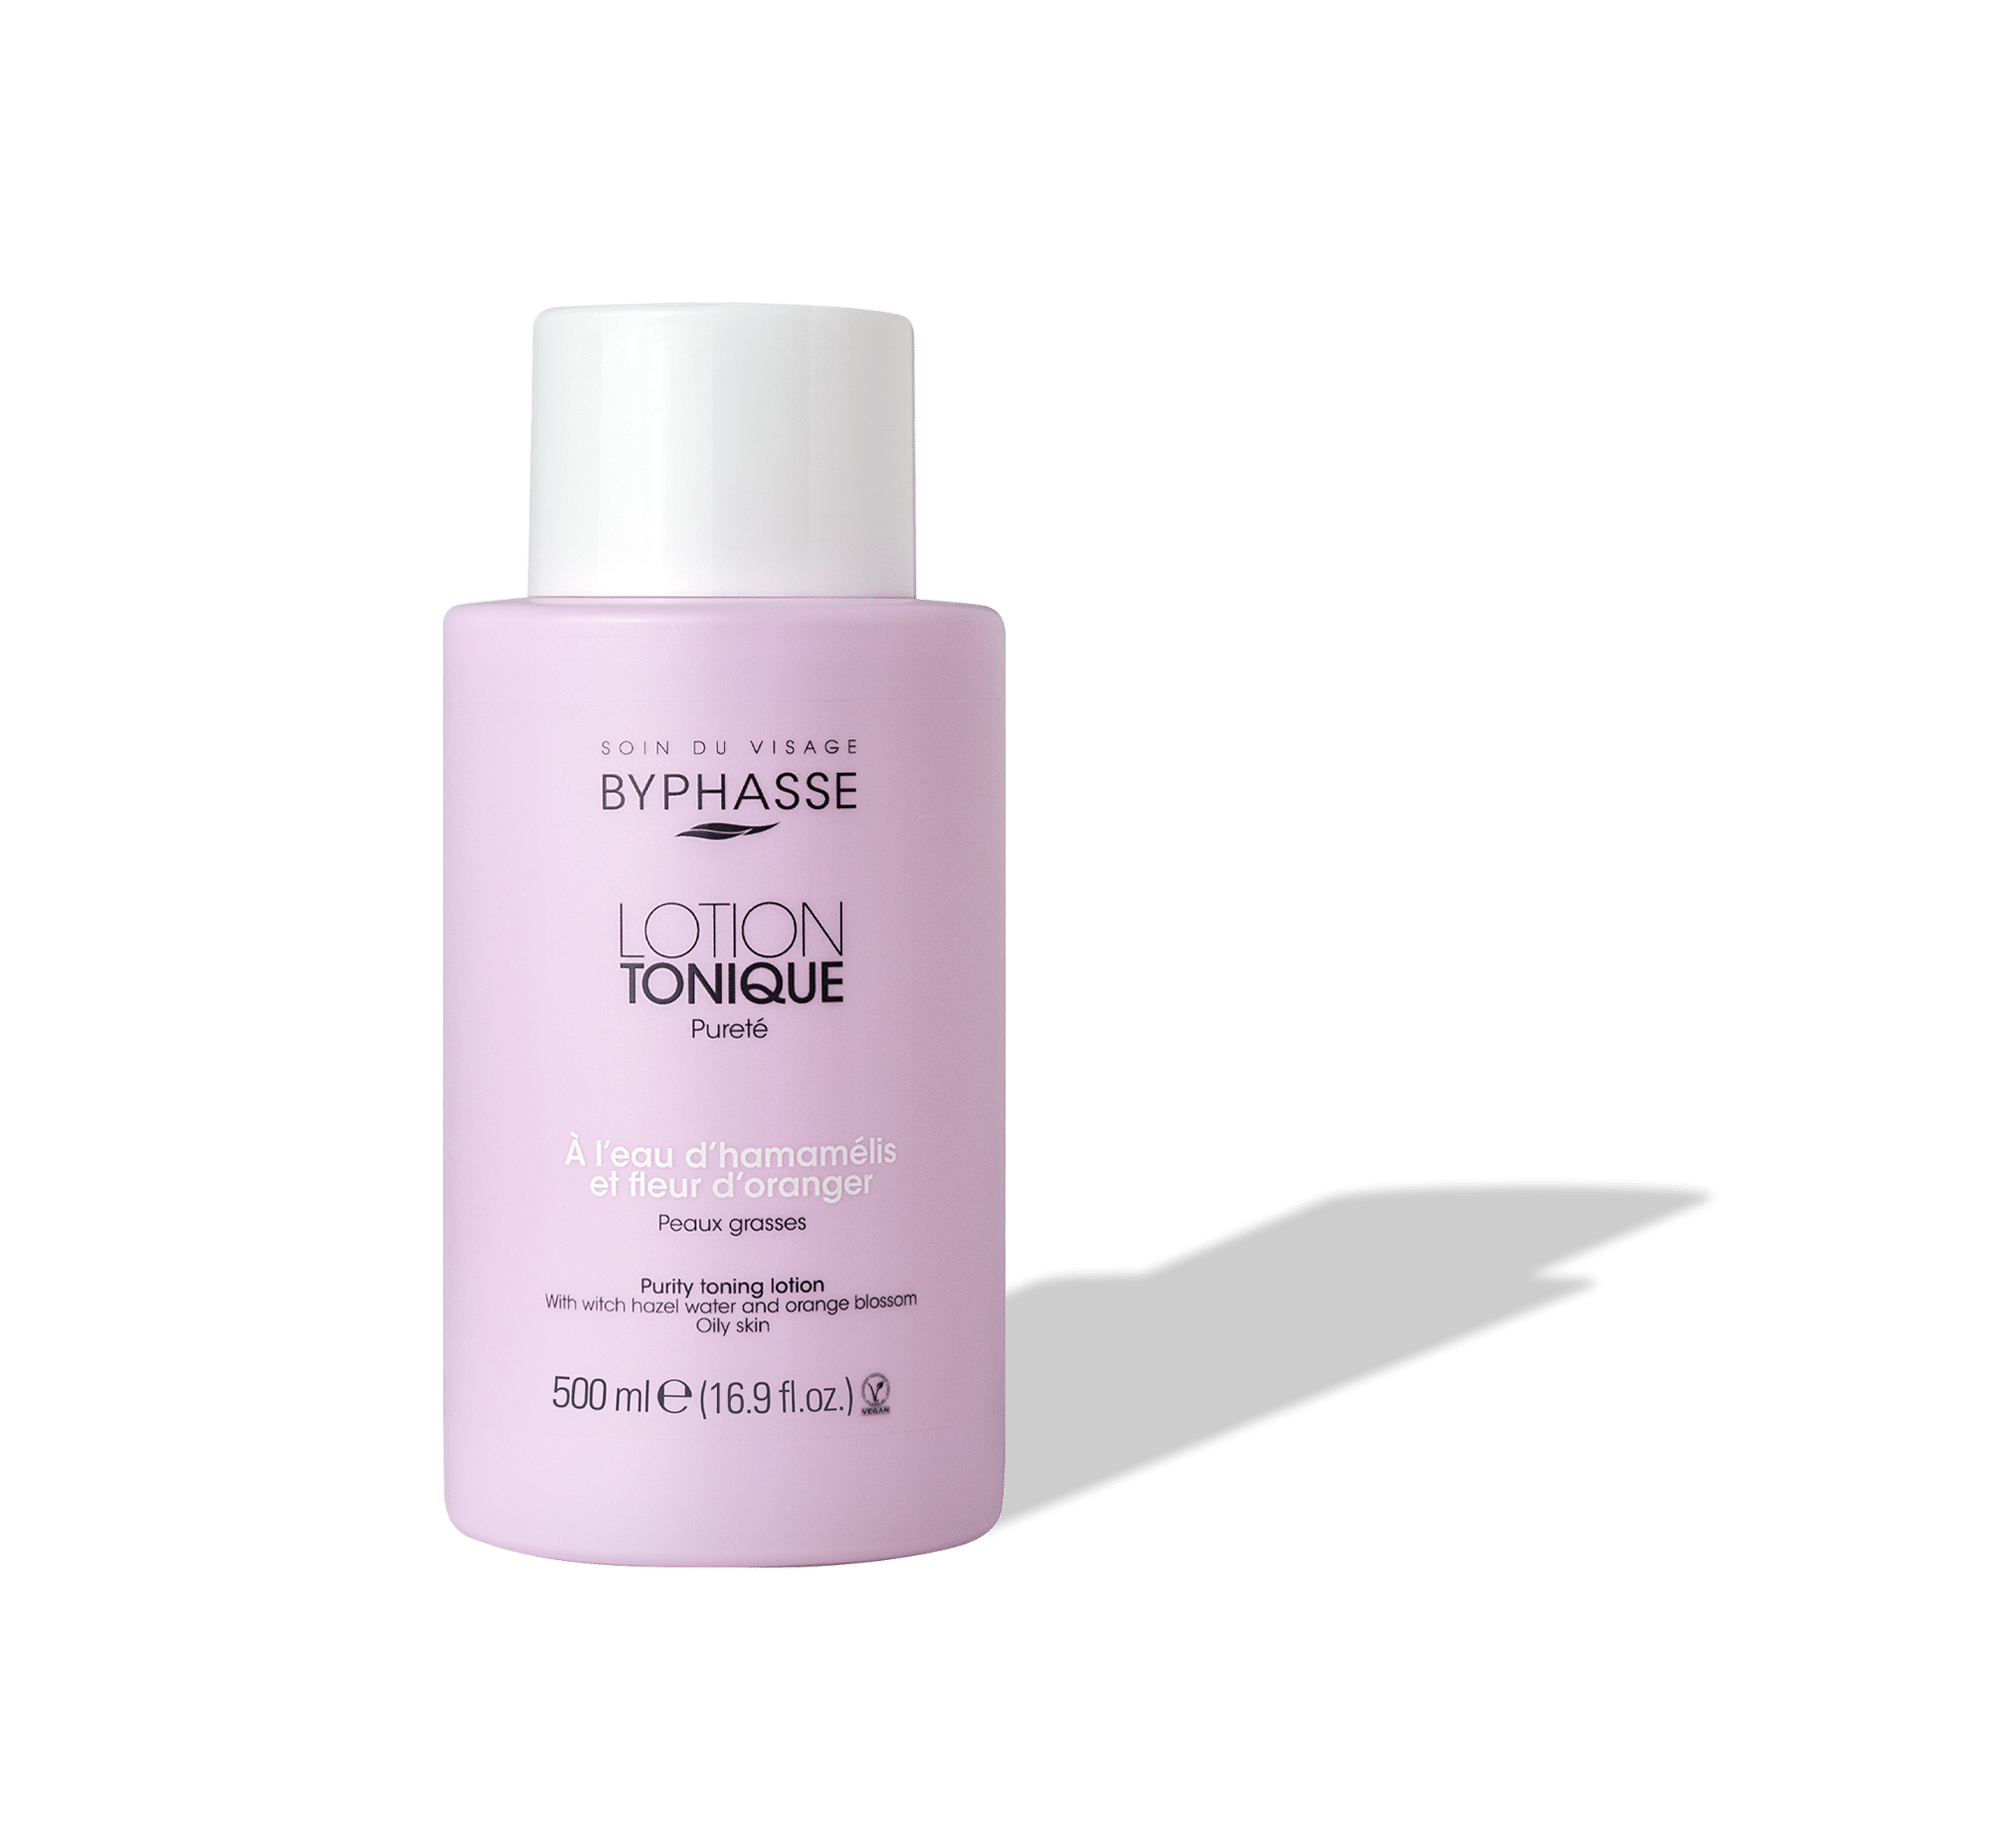 TONING LOTION OILY SKIN 500ML | BYPHASSE